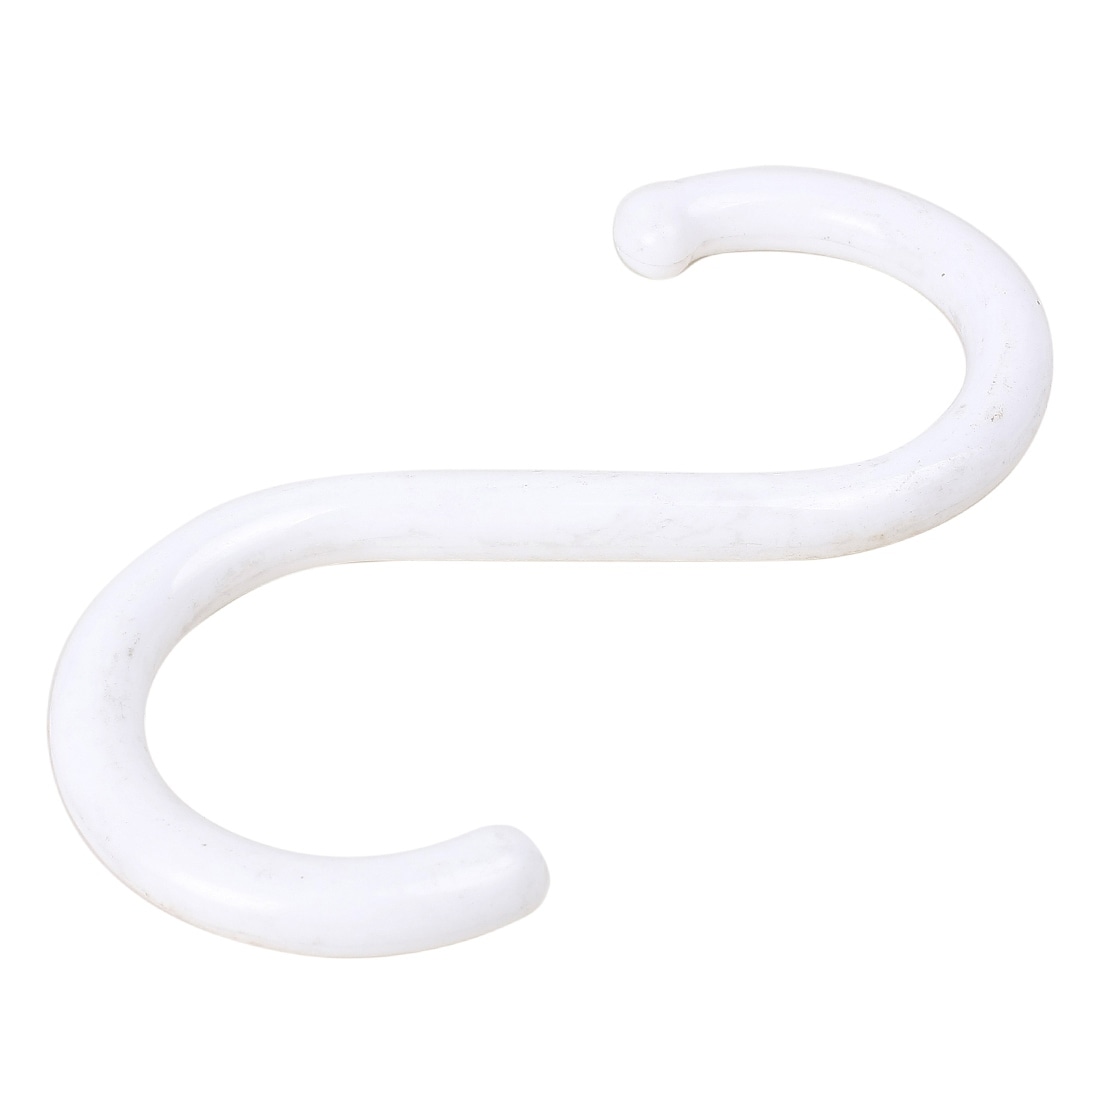 https://ak1.ostkcdn.com/images/products/is/images/direct/c518381dff5b7a65aff19f9cce3ae702d41d2690/3pcs-Plastic-S-Shape-Hooks-Hangers-Clasp-for-Hanging-Coat-Shower-Item.jpg